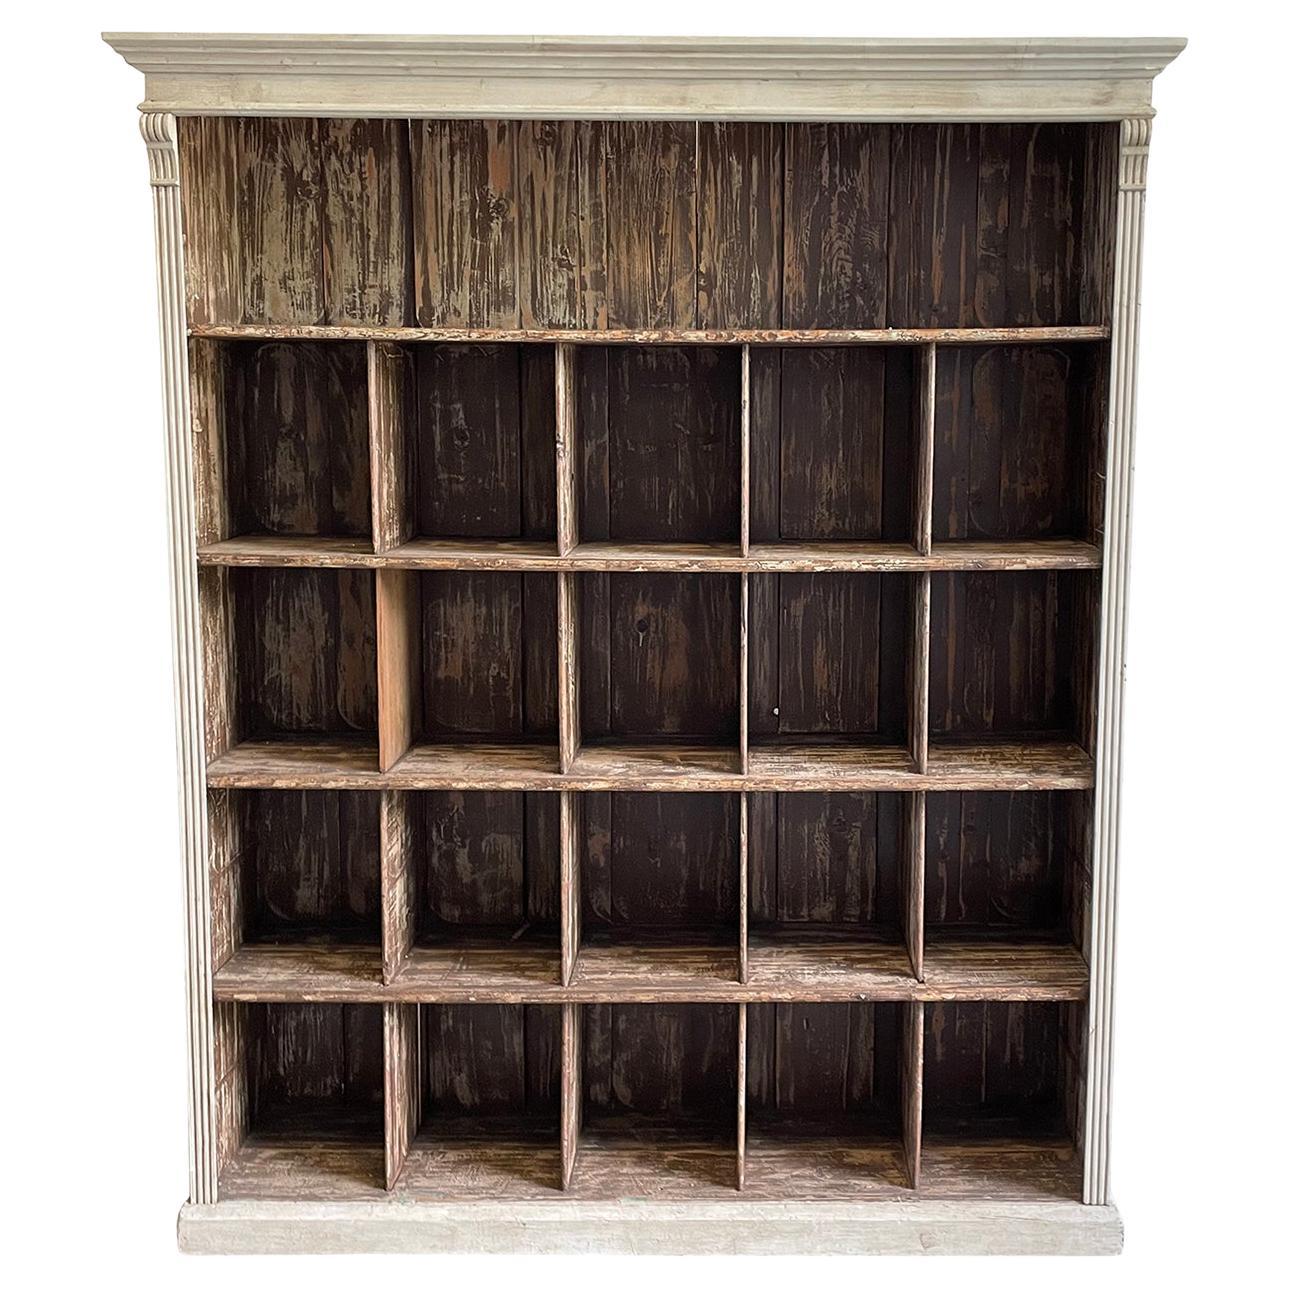 19th Century French Pinewood Book Shelf - Antique Cupboard For Sale